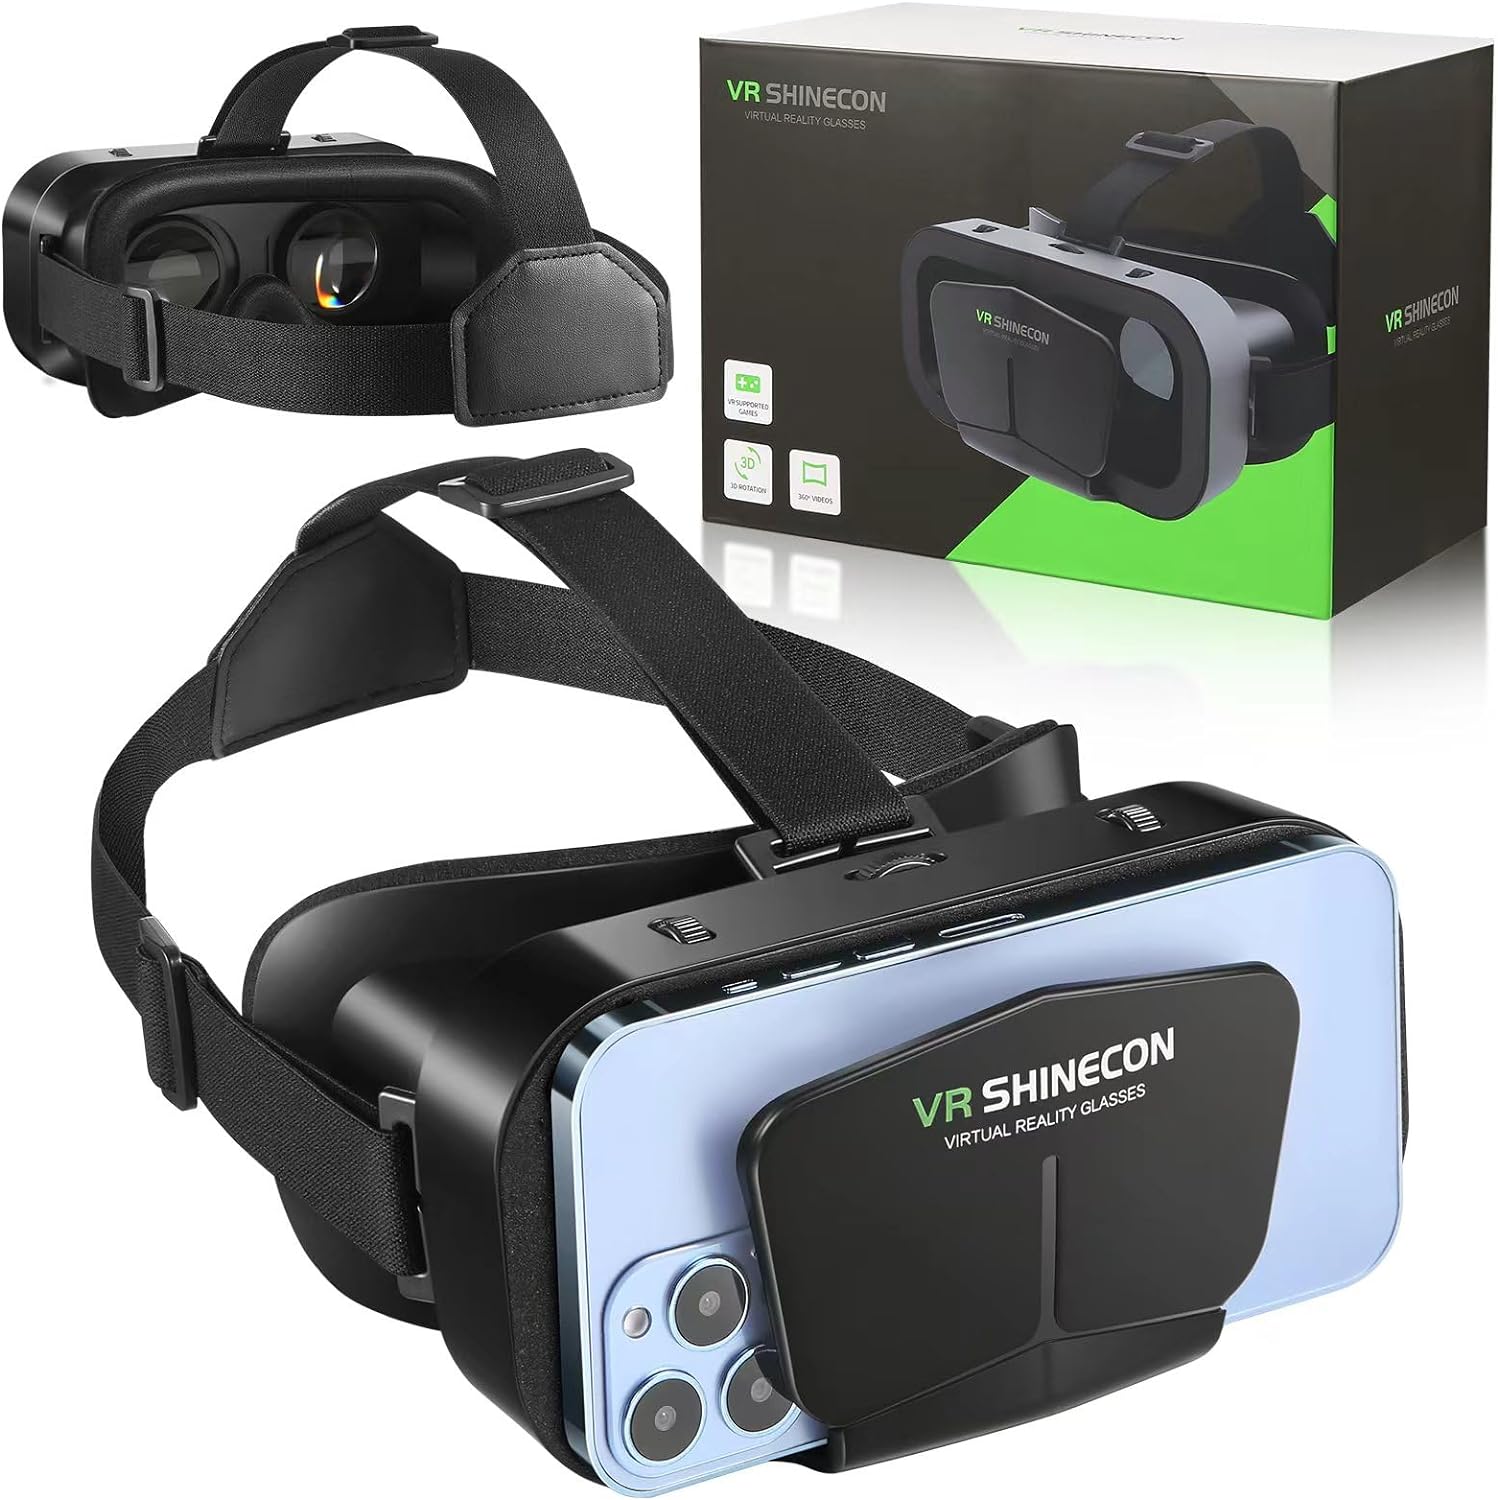 Read more about the article VR SHINECON Virtual Reality VR Headset Review